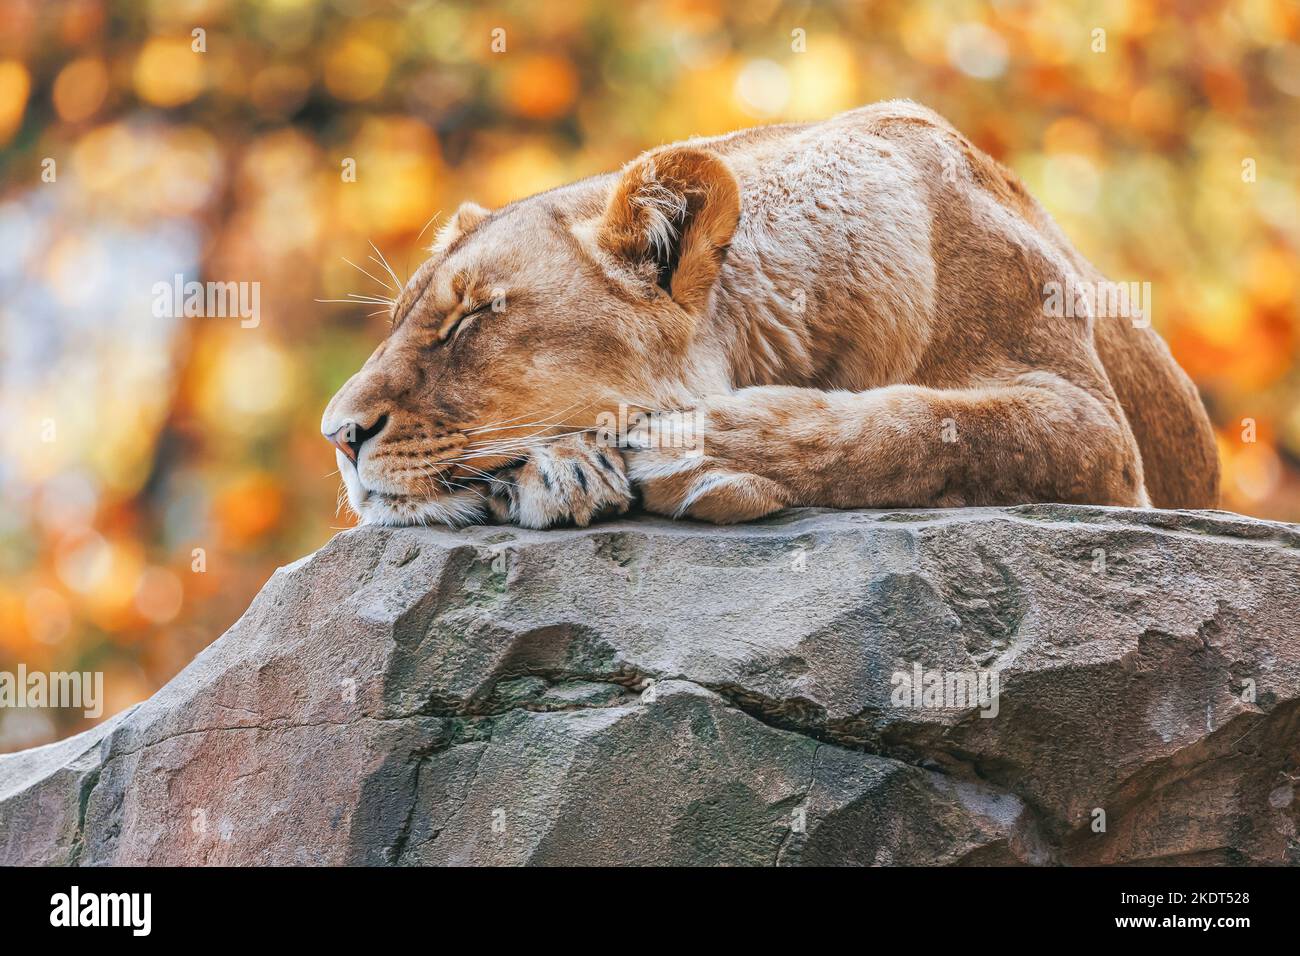 Sleeping lioness lies on a stone Stock Photo